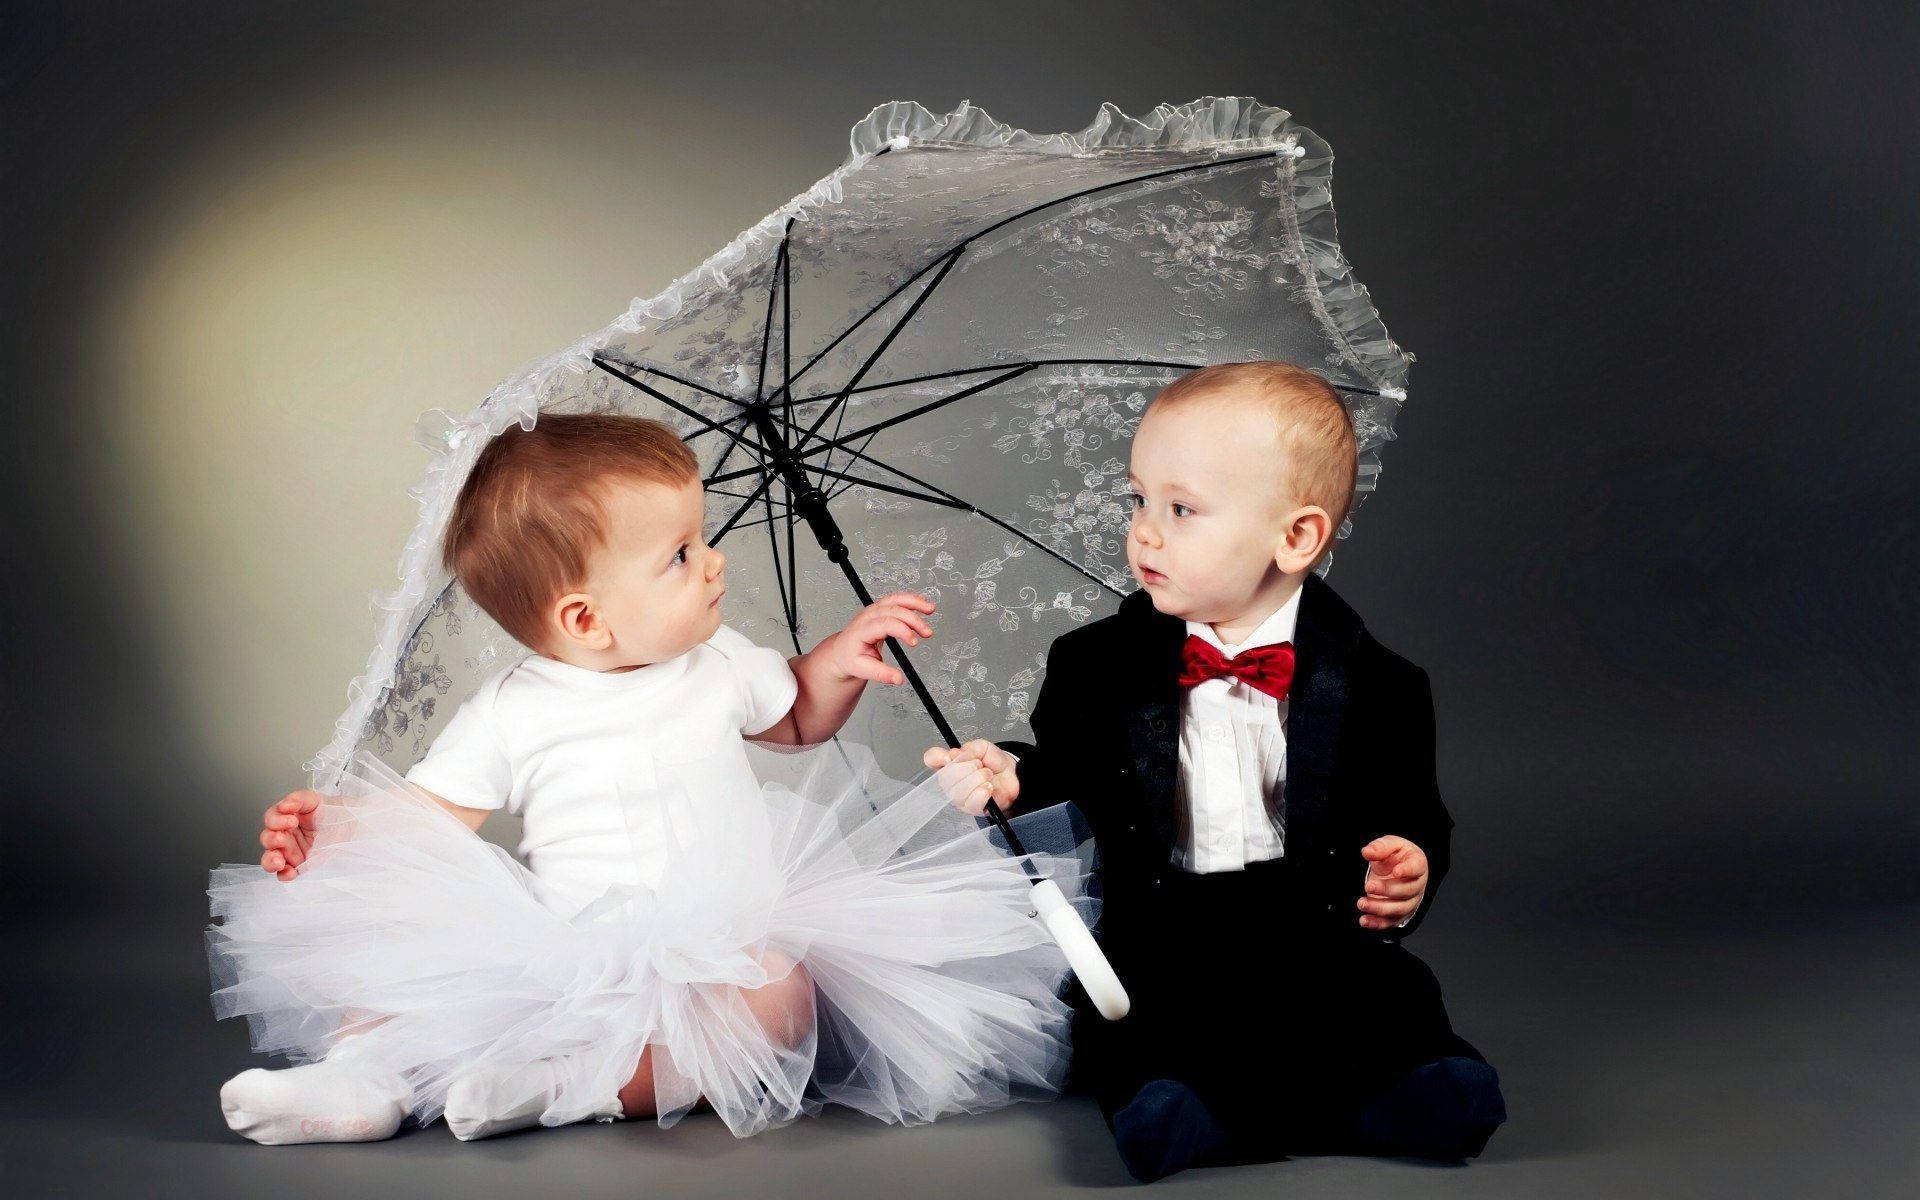 Download Very Cute Baby Girl And Baby Boy Wallpaper 